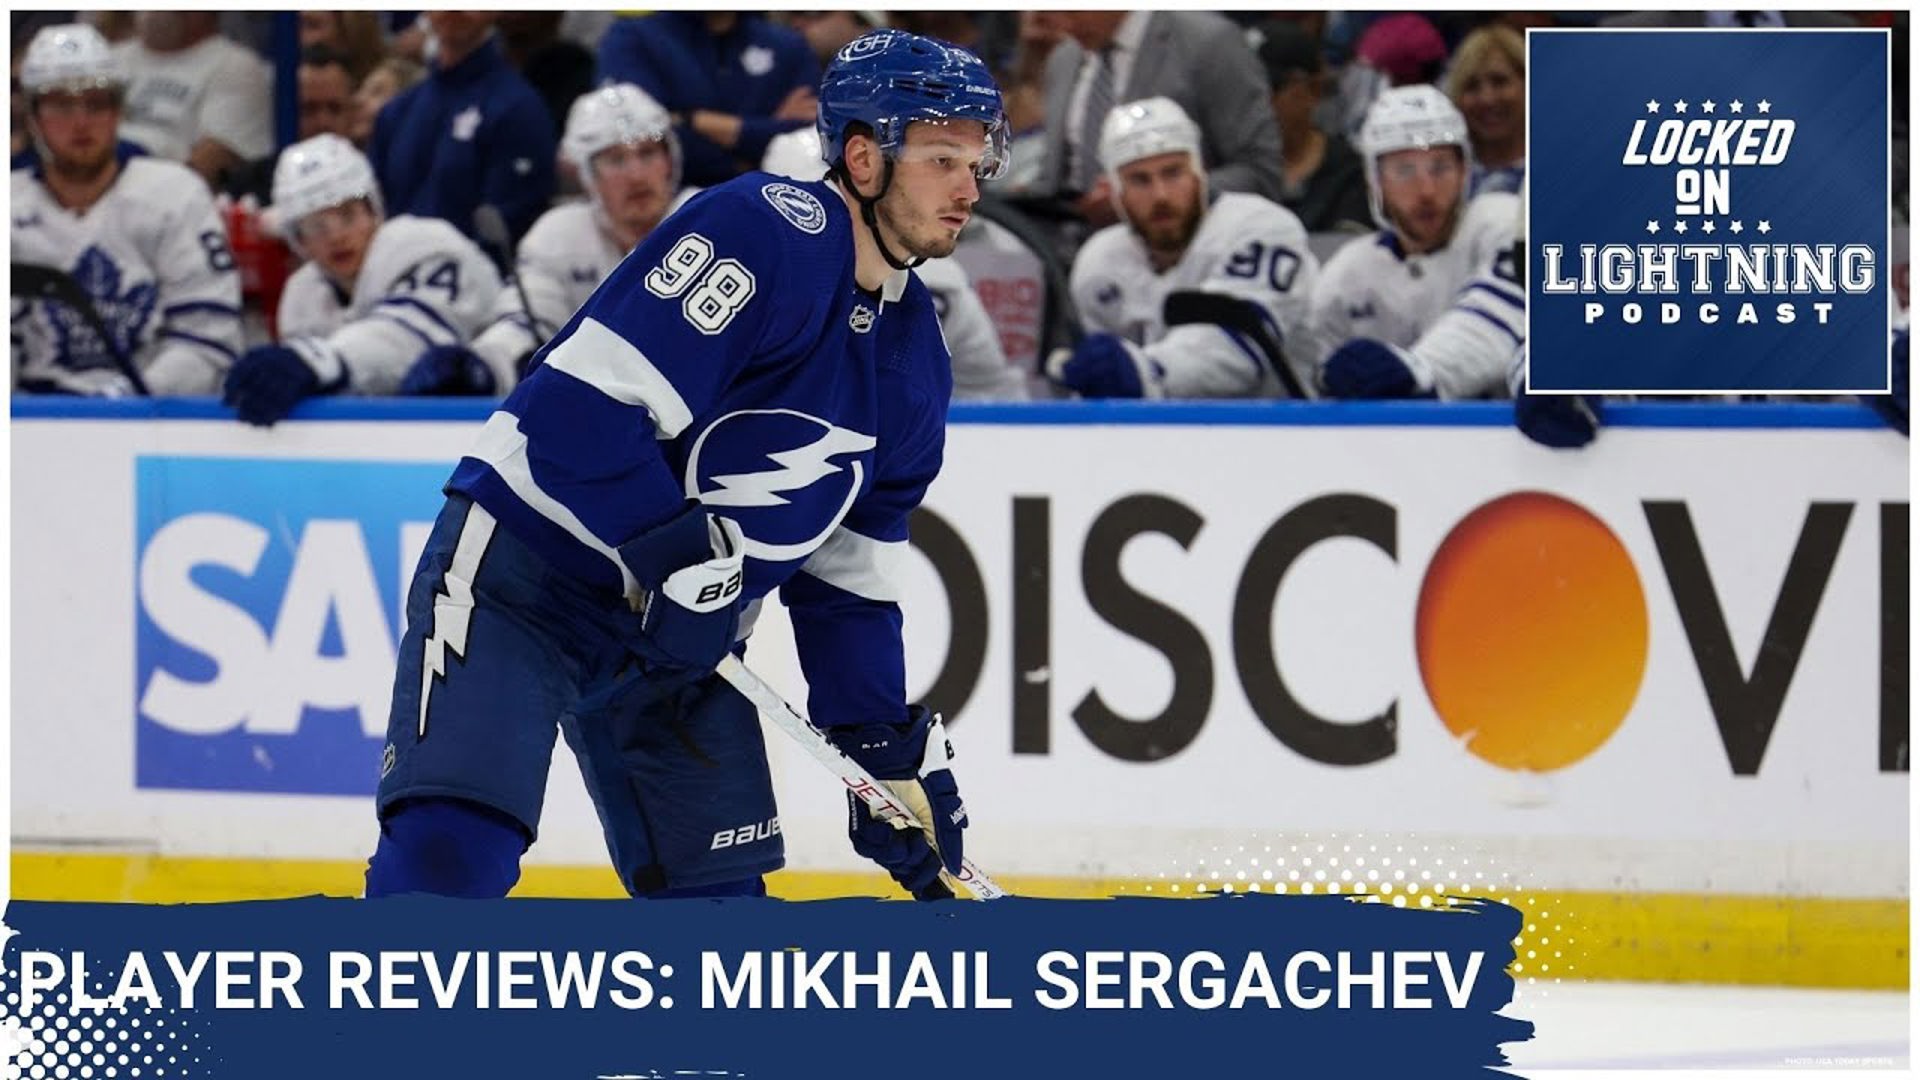 We continue our player reviews as we move onto Mikhail Sergachev. We discuss his year that saw him miss 48 games due to injury.